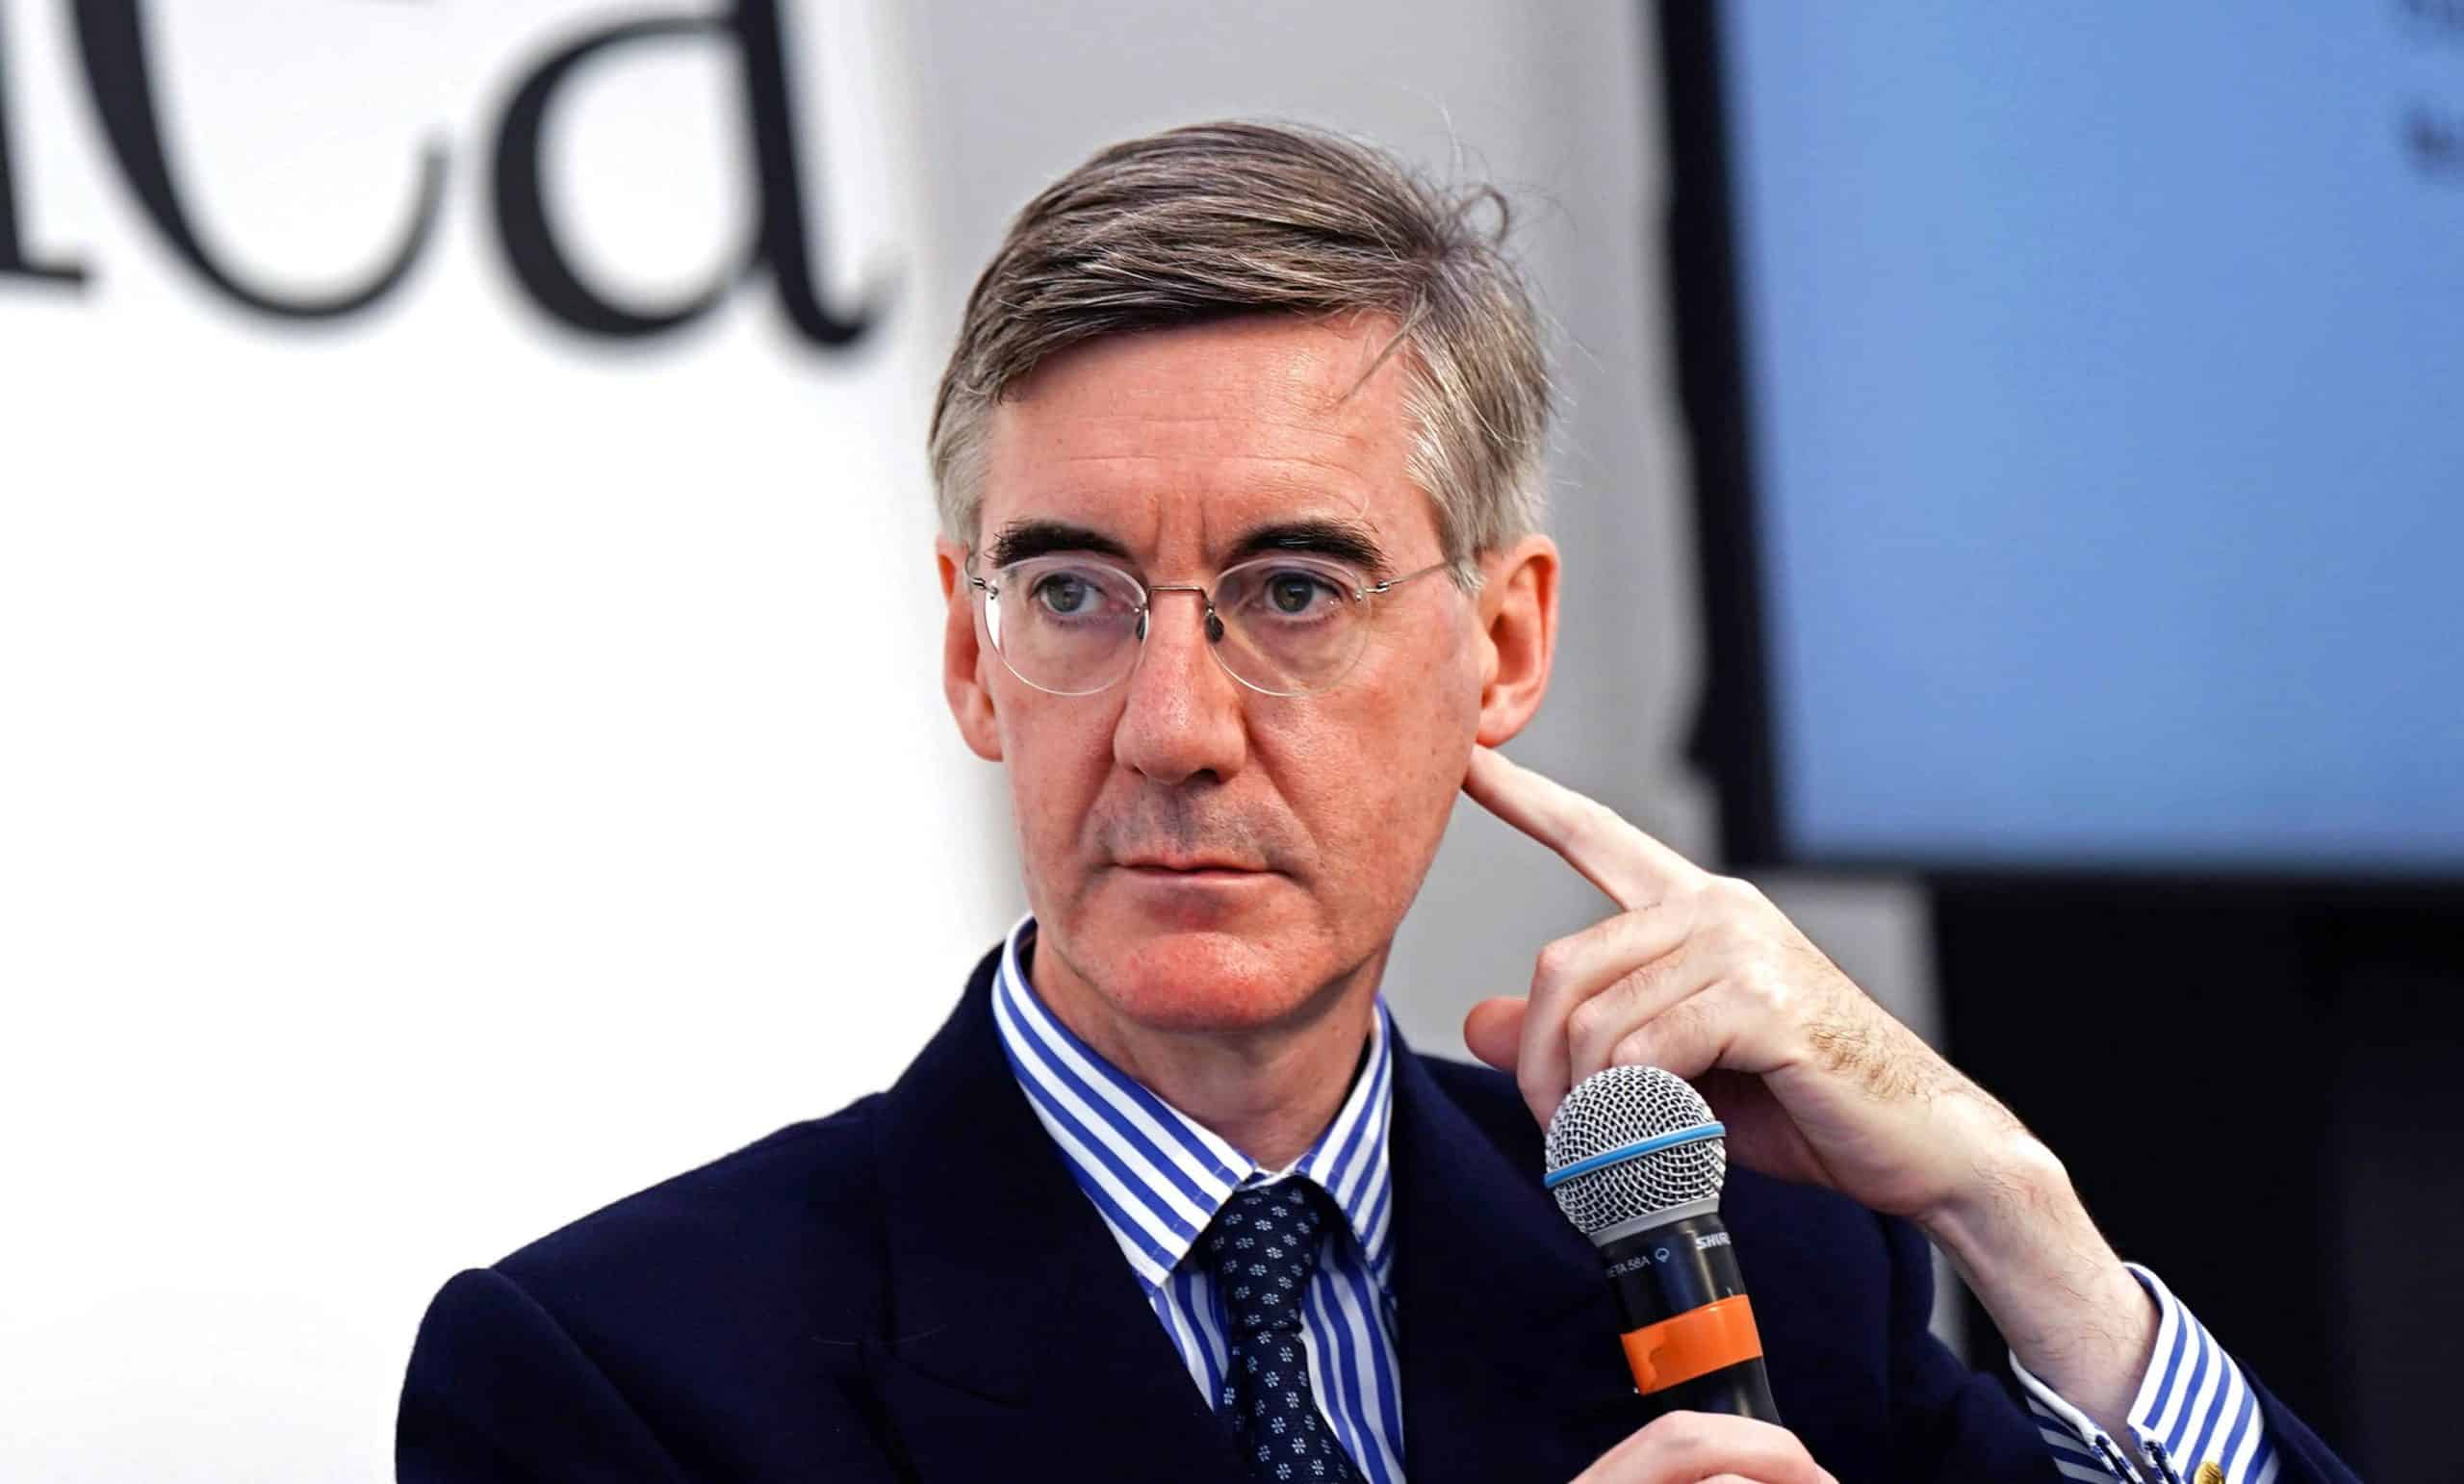 Jacob Rees-Mogg: A short biography of one of Britain’s most bizarre politicians